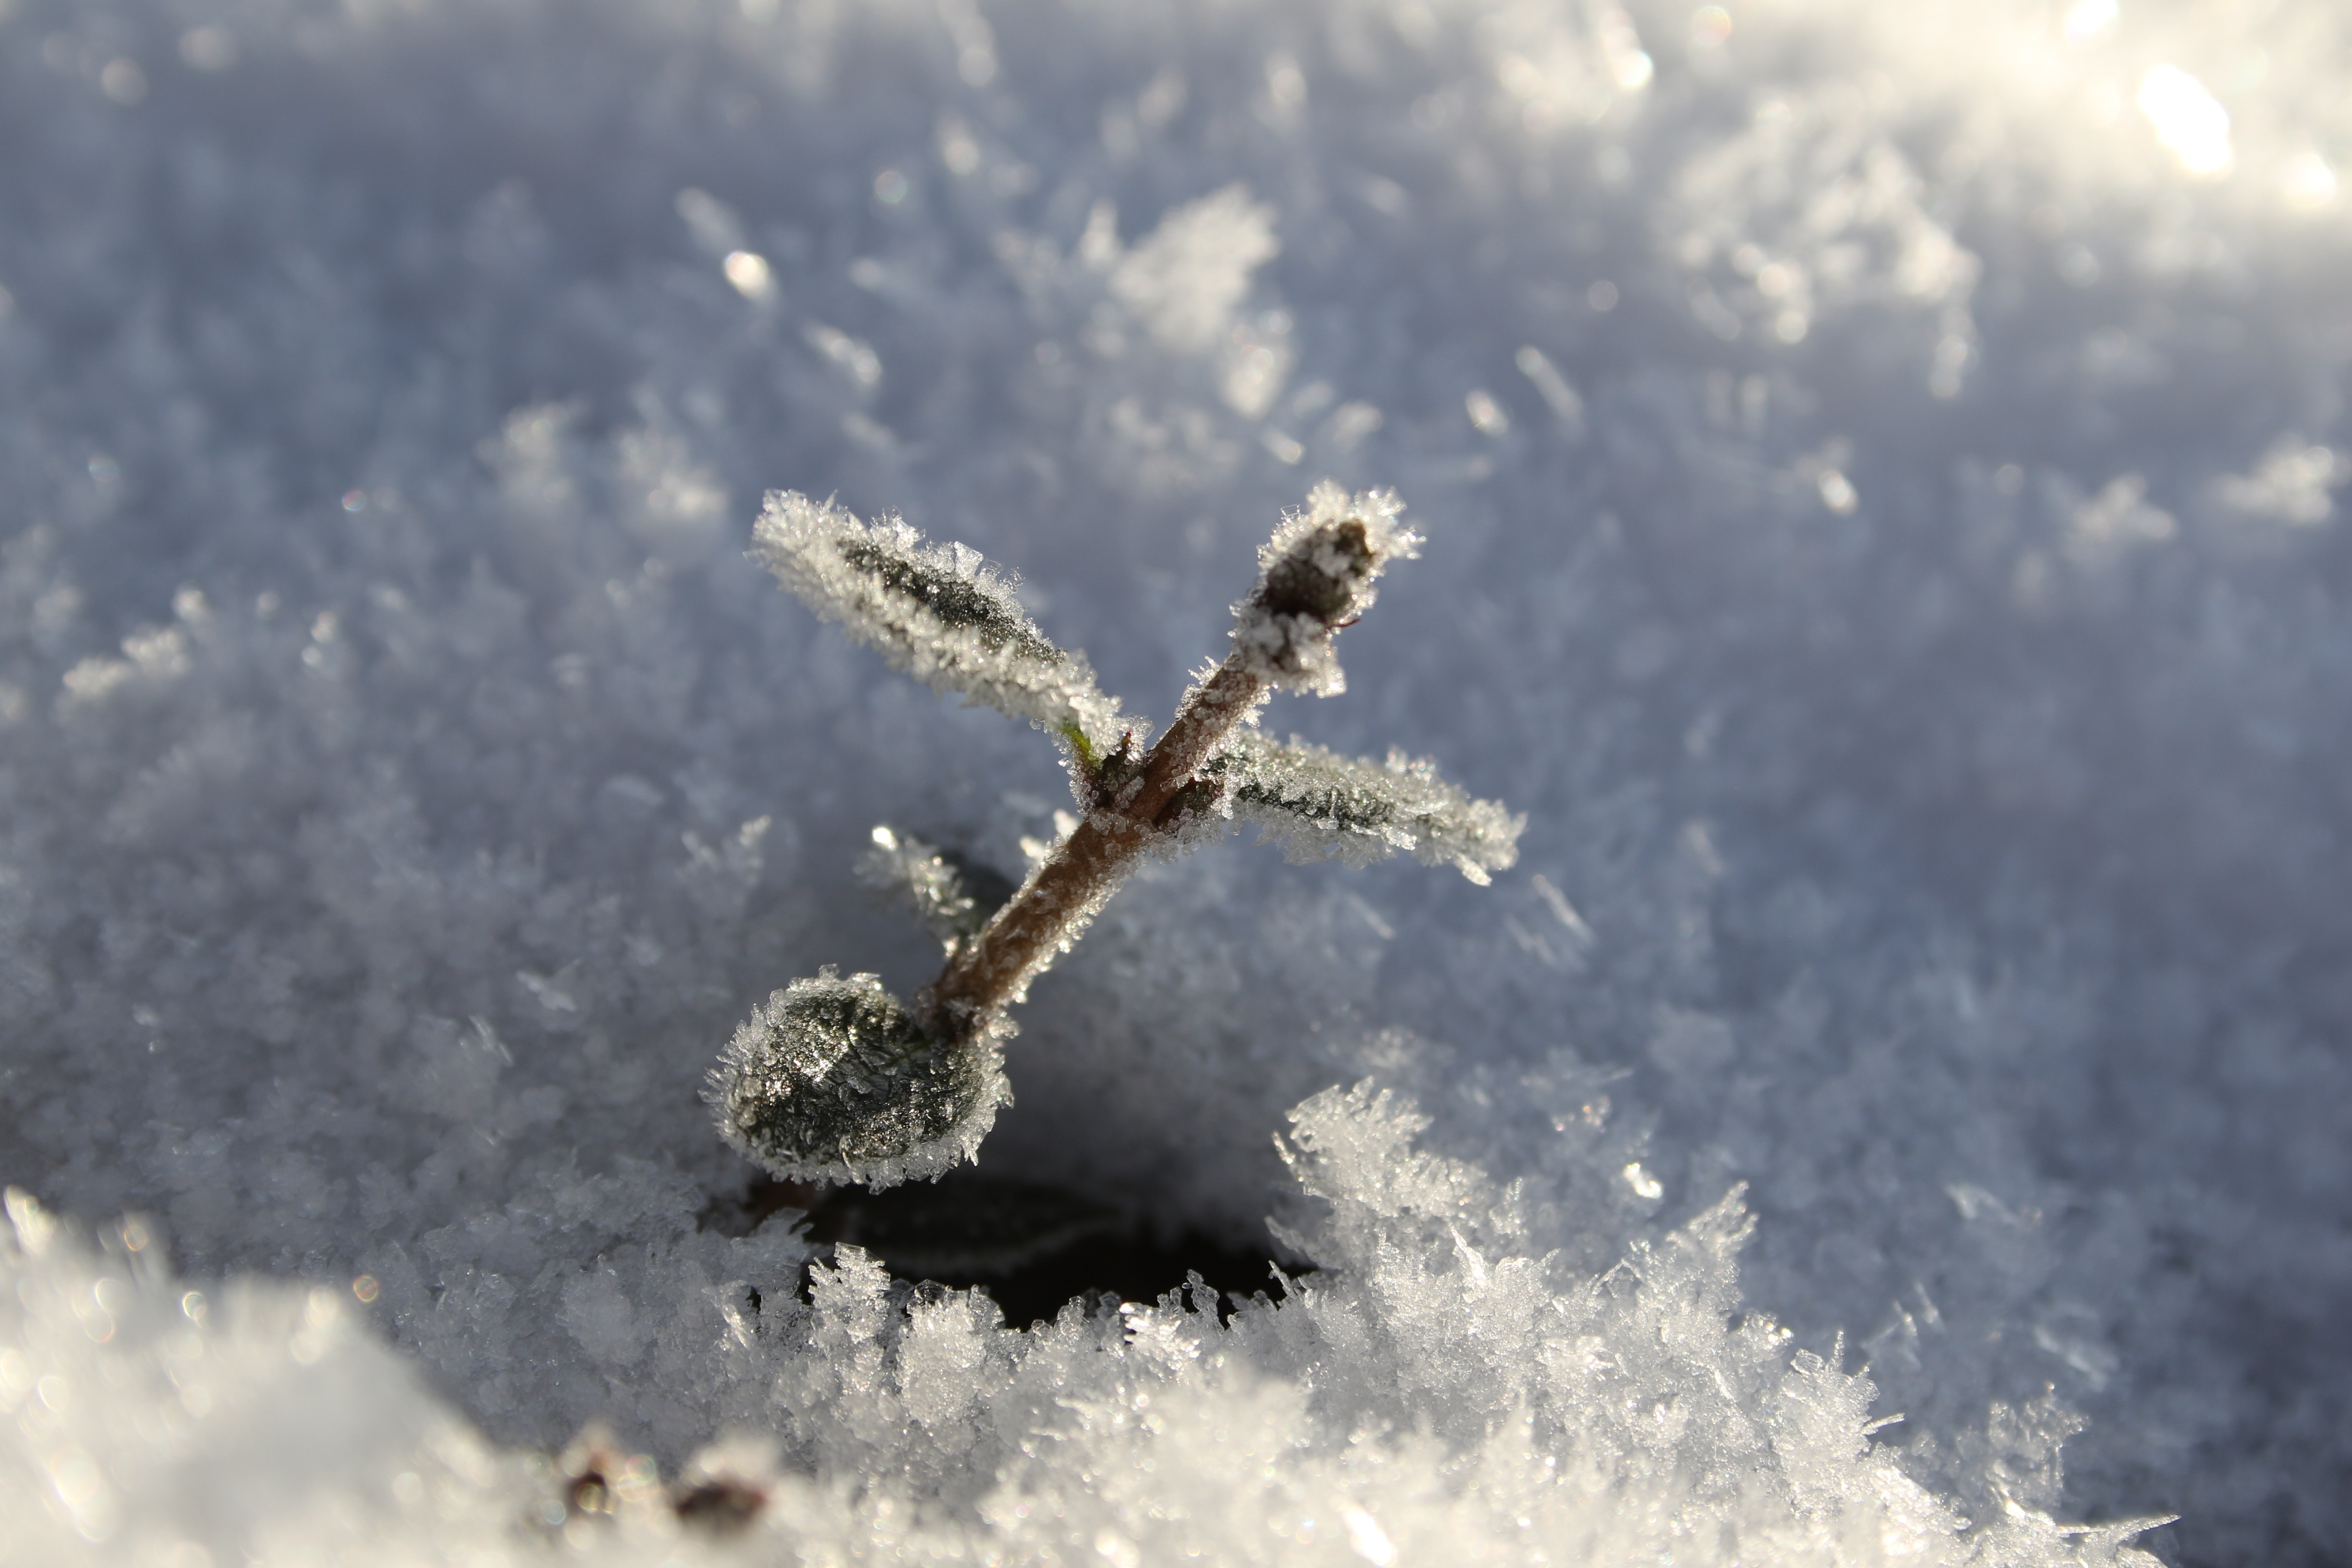 Plant, Frost, Shot, Leaf, Snow, Winter, one animal, no people